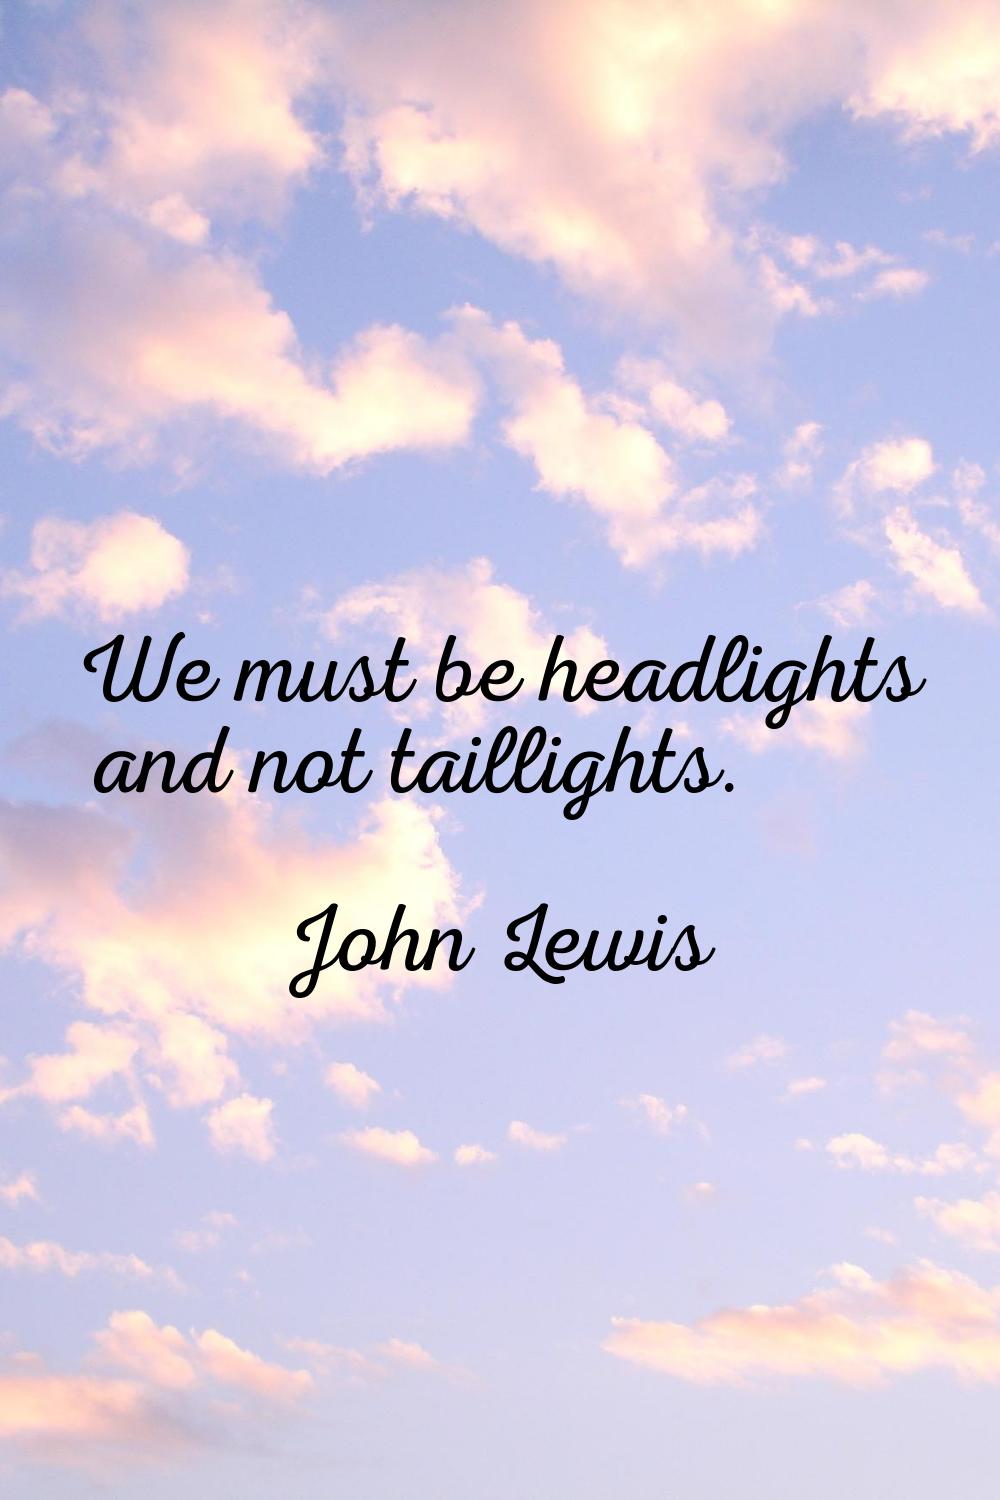 We must be headlights and not taillights.